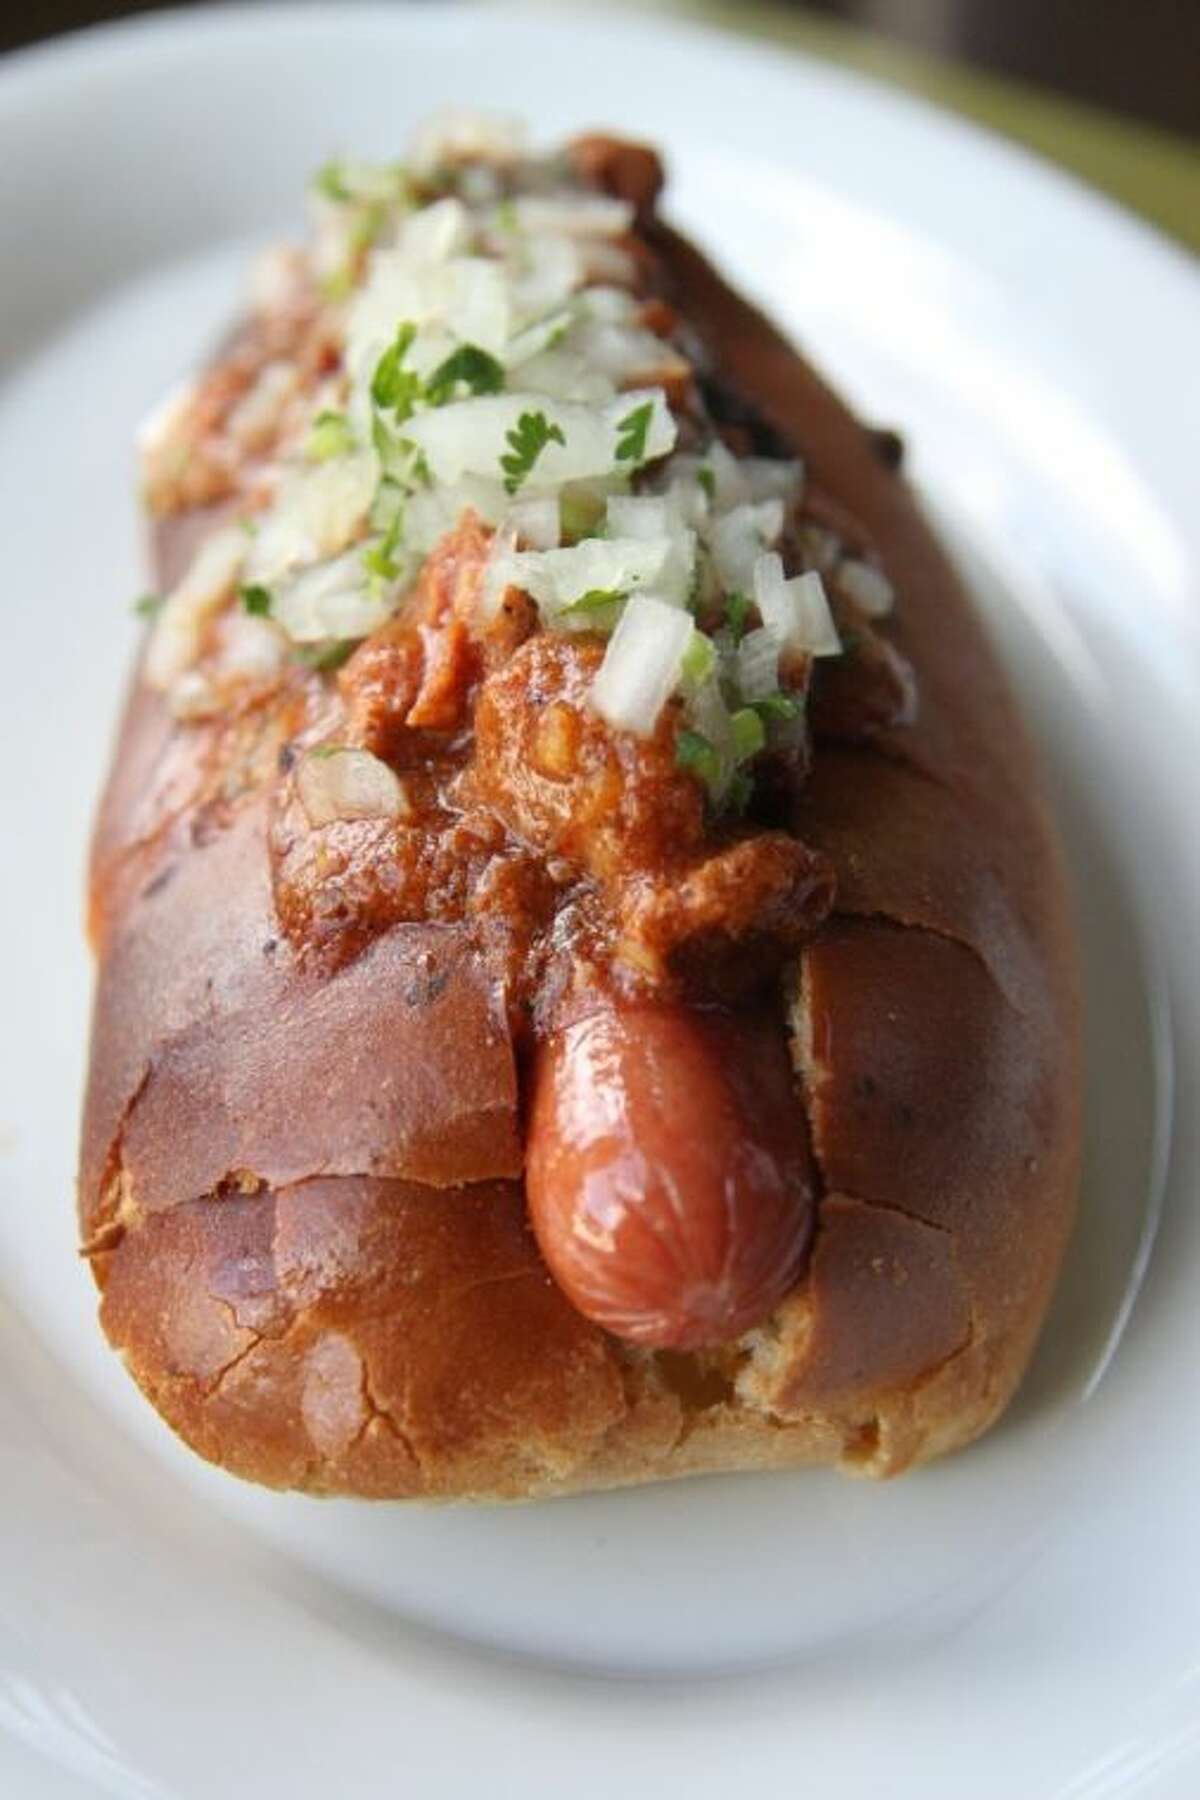 A fun designer dog comes from Chef Randy Evans at Haven — The Huntin’ Dog. It features a 100-percent Angus weiner with a jalapeno cheddar bun and loads of chili, topped with chopped onion and cilantro.